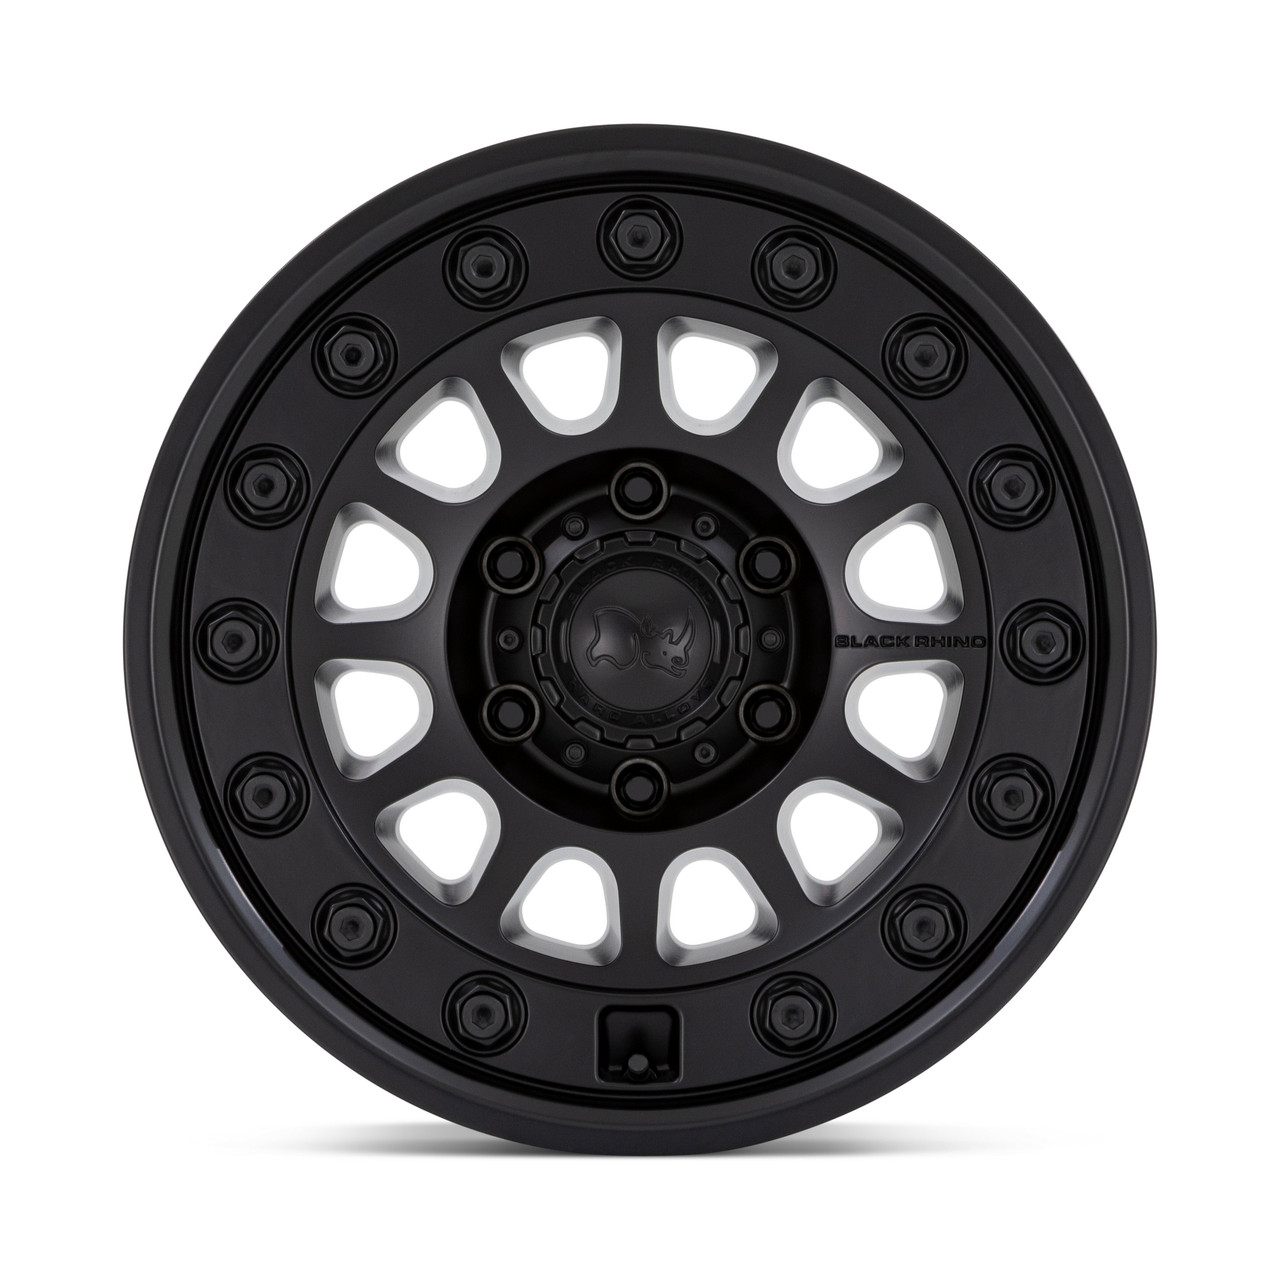 Black Rhino BR012 Outback 18x8 Matte Black Wheel 6x135 18" 32mm For Ford Lincoln